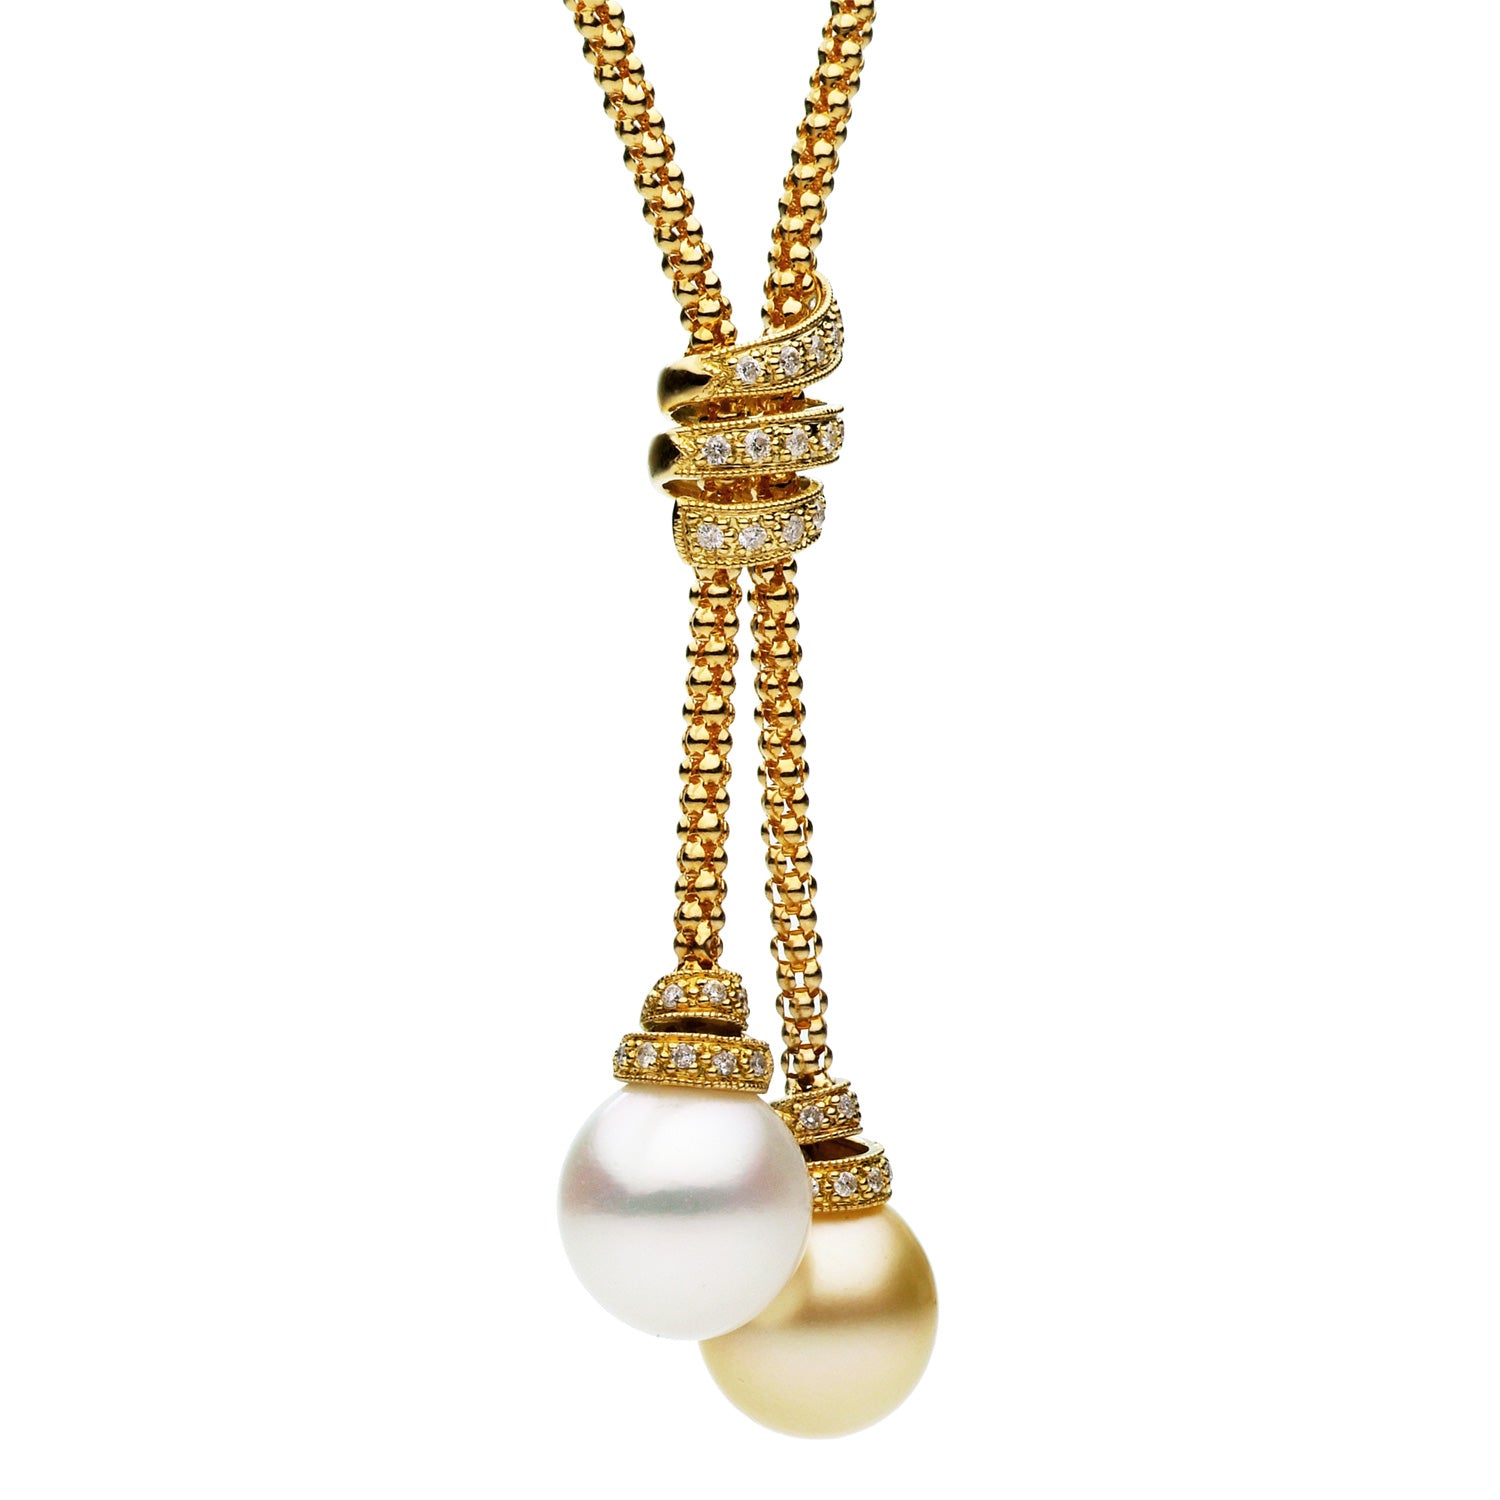 18KY White & Golden South Sea Pearl Necklace, 12-13mm